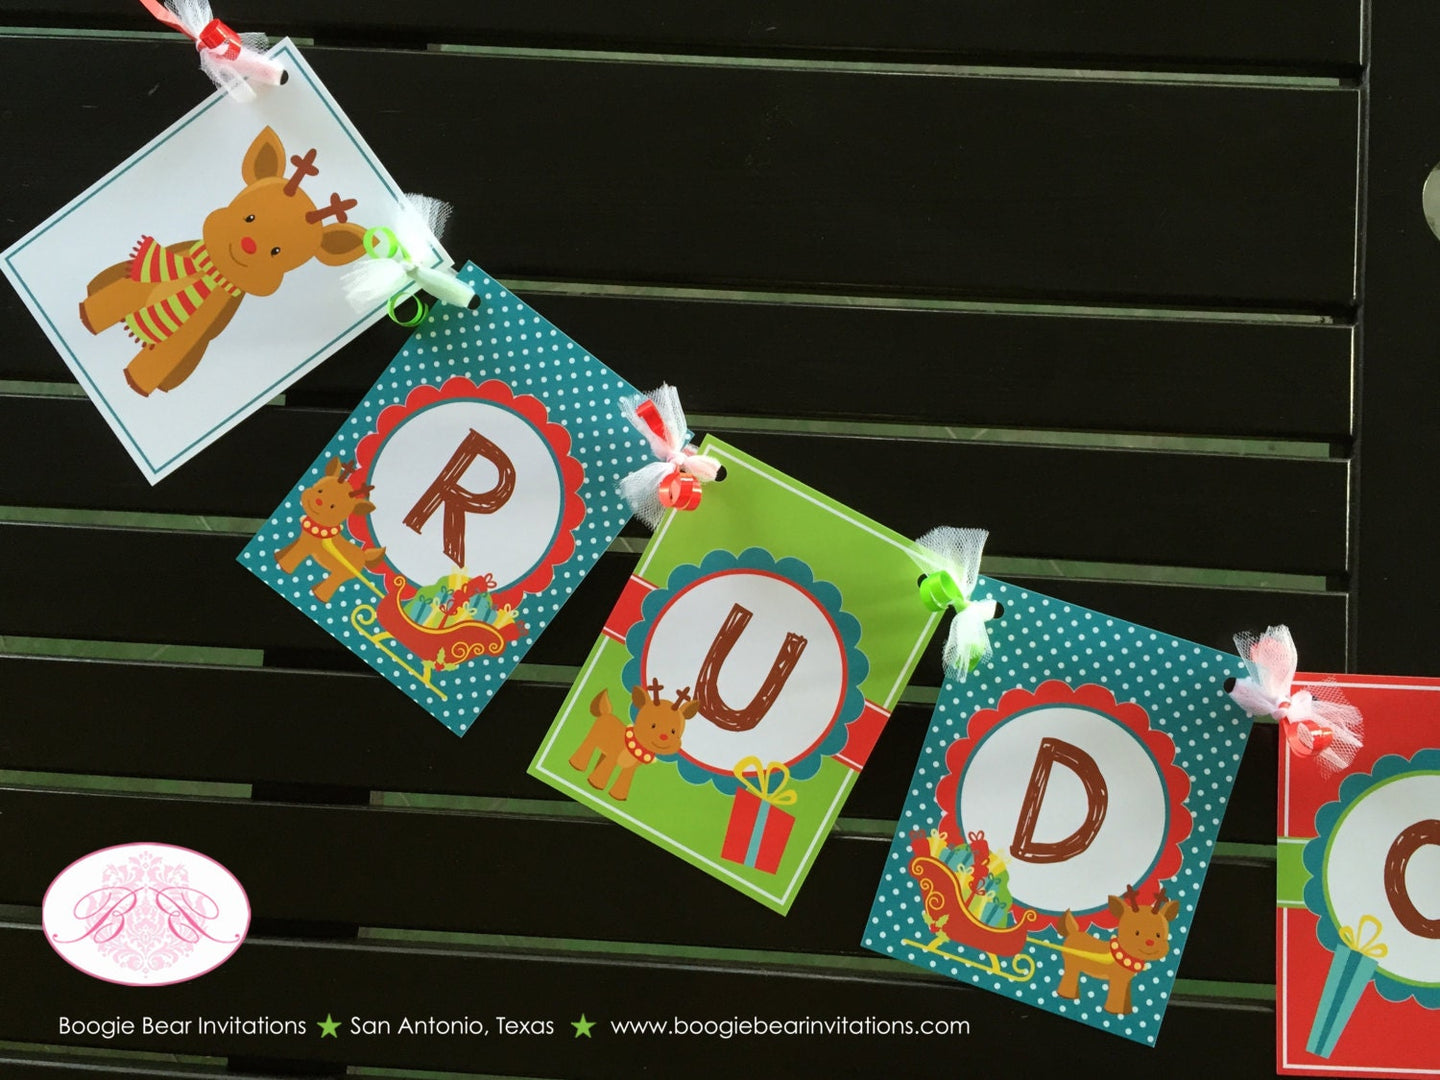 Little Reindeer Birthday Name Banner Party Girl Boy Christmas Winter Santa Sleigh Presents Red Nose Boogie Bear Invitations Rudolph Theme